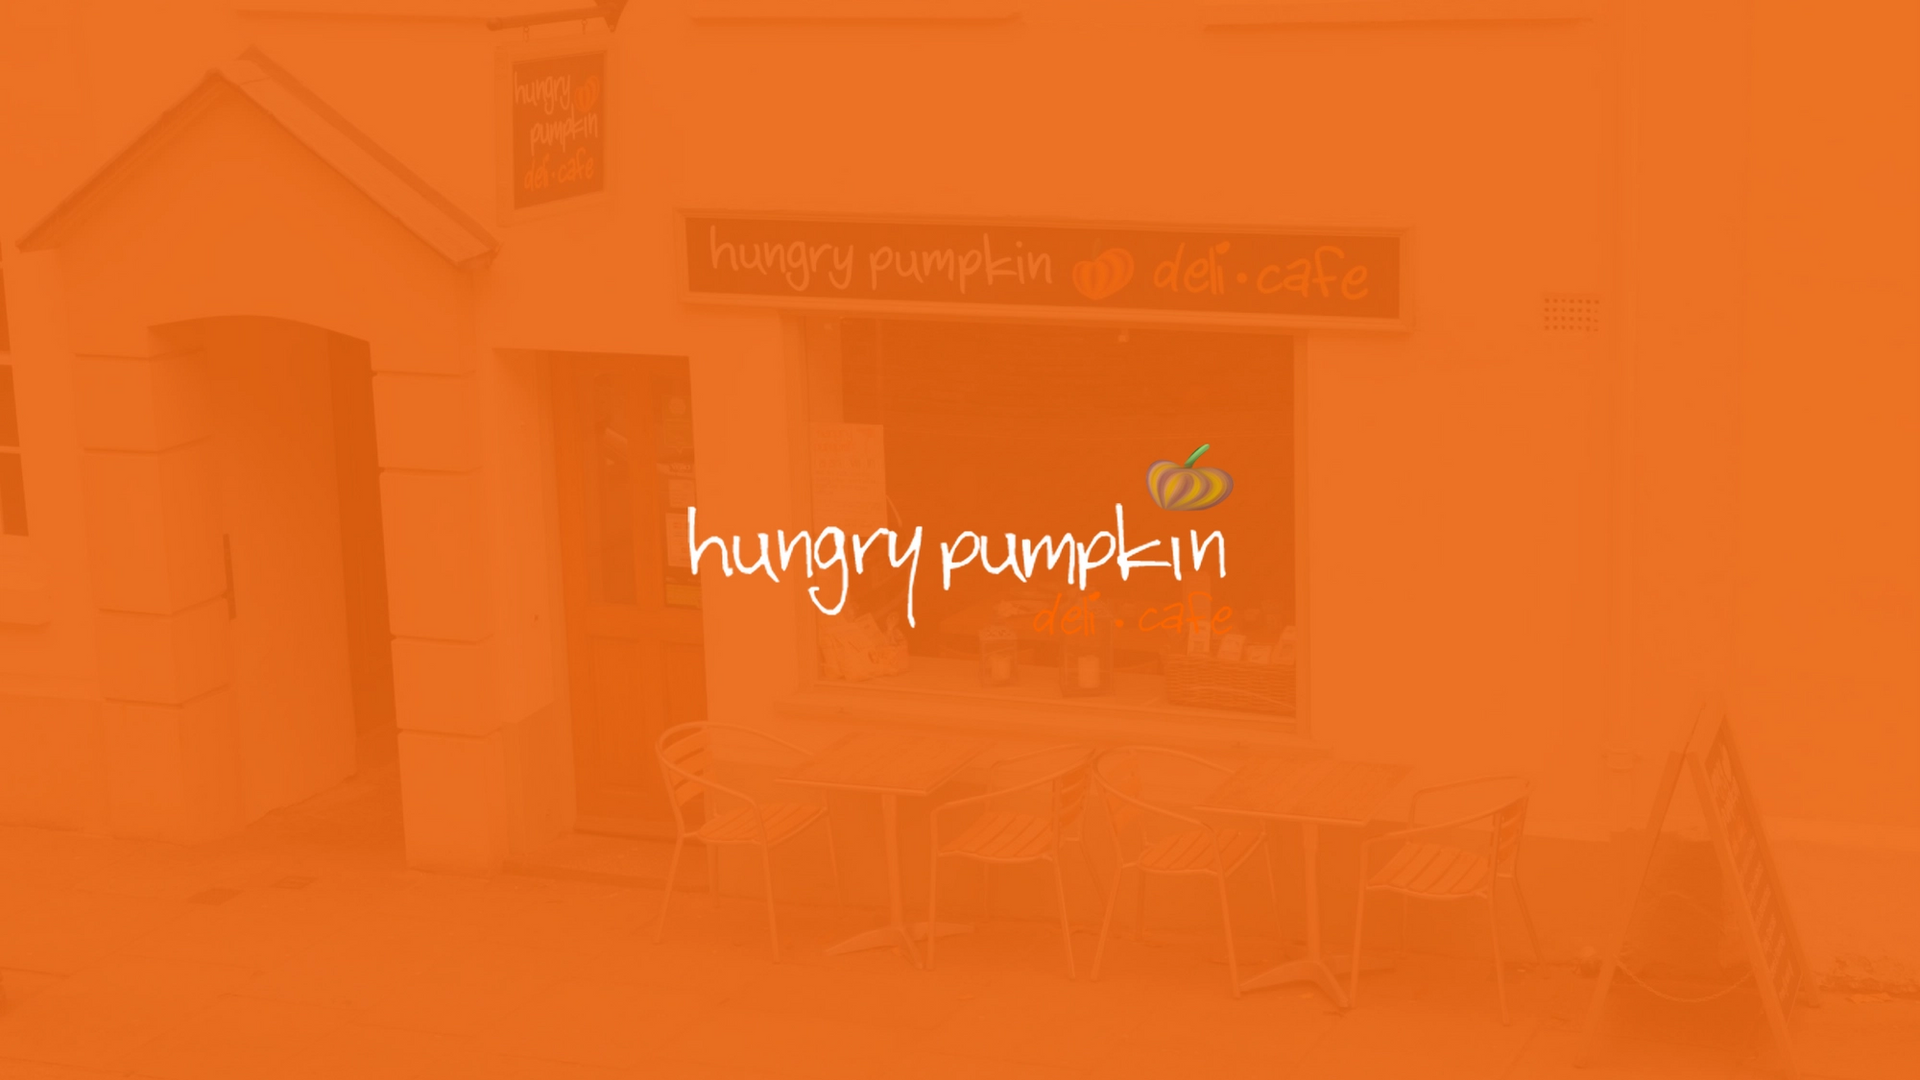 Hungry Pumpkin logo with the shop faintly in the background